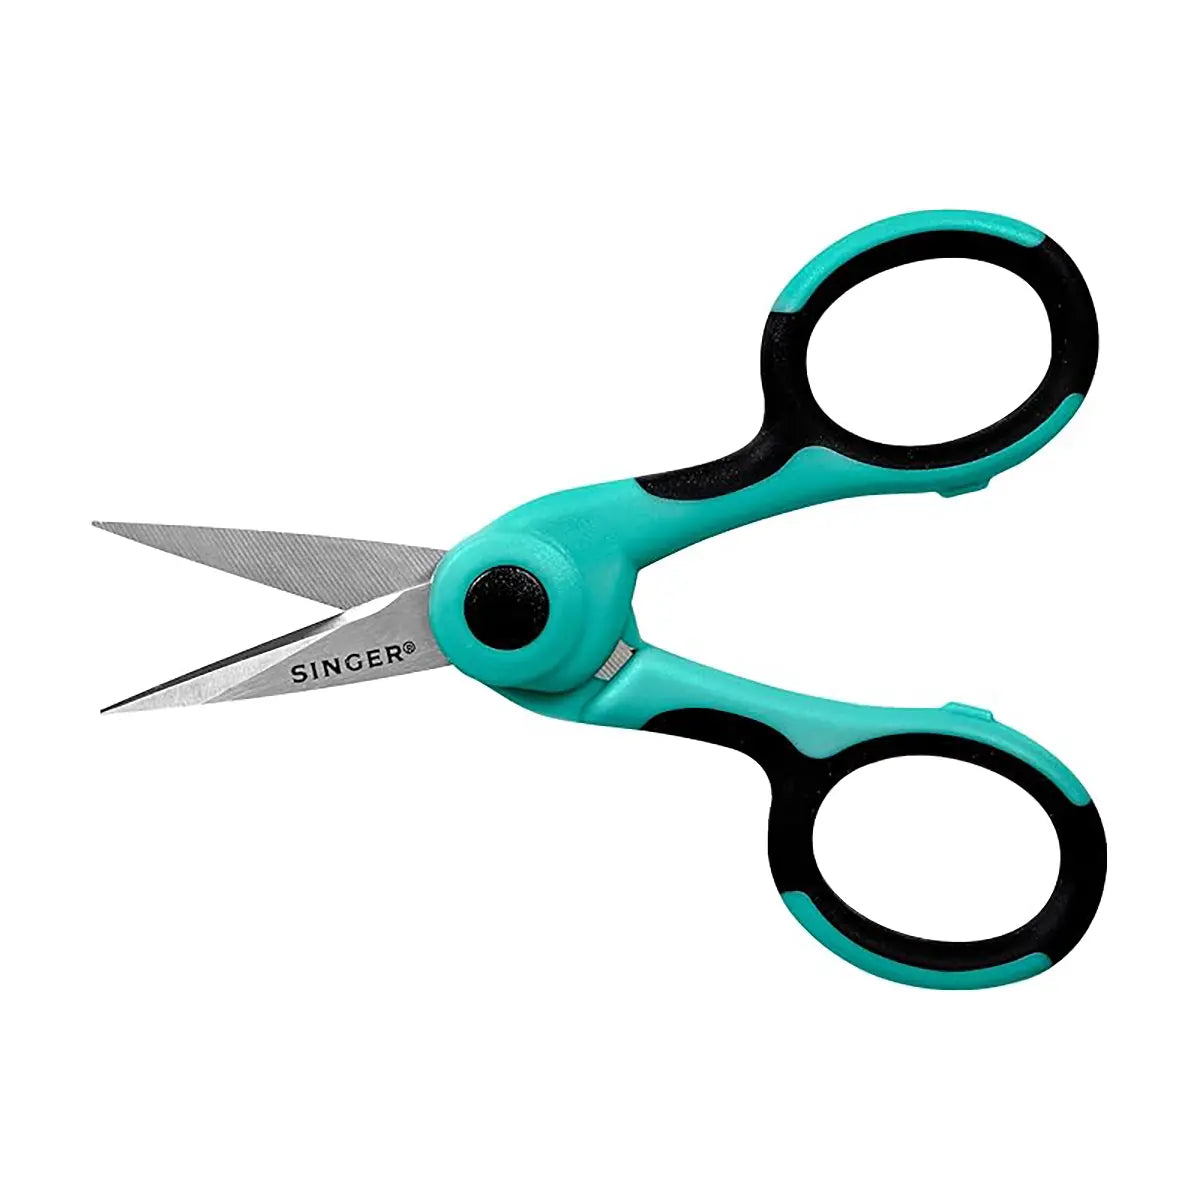 Singer 4.5 Inch Pro Detail Scissors with Nano Tip